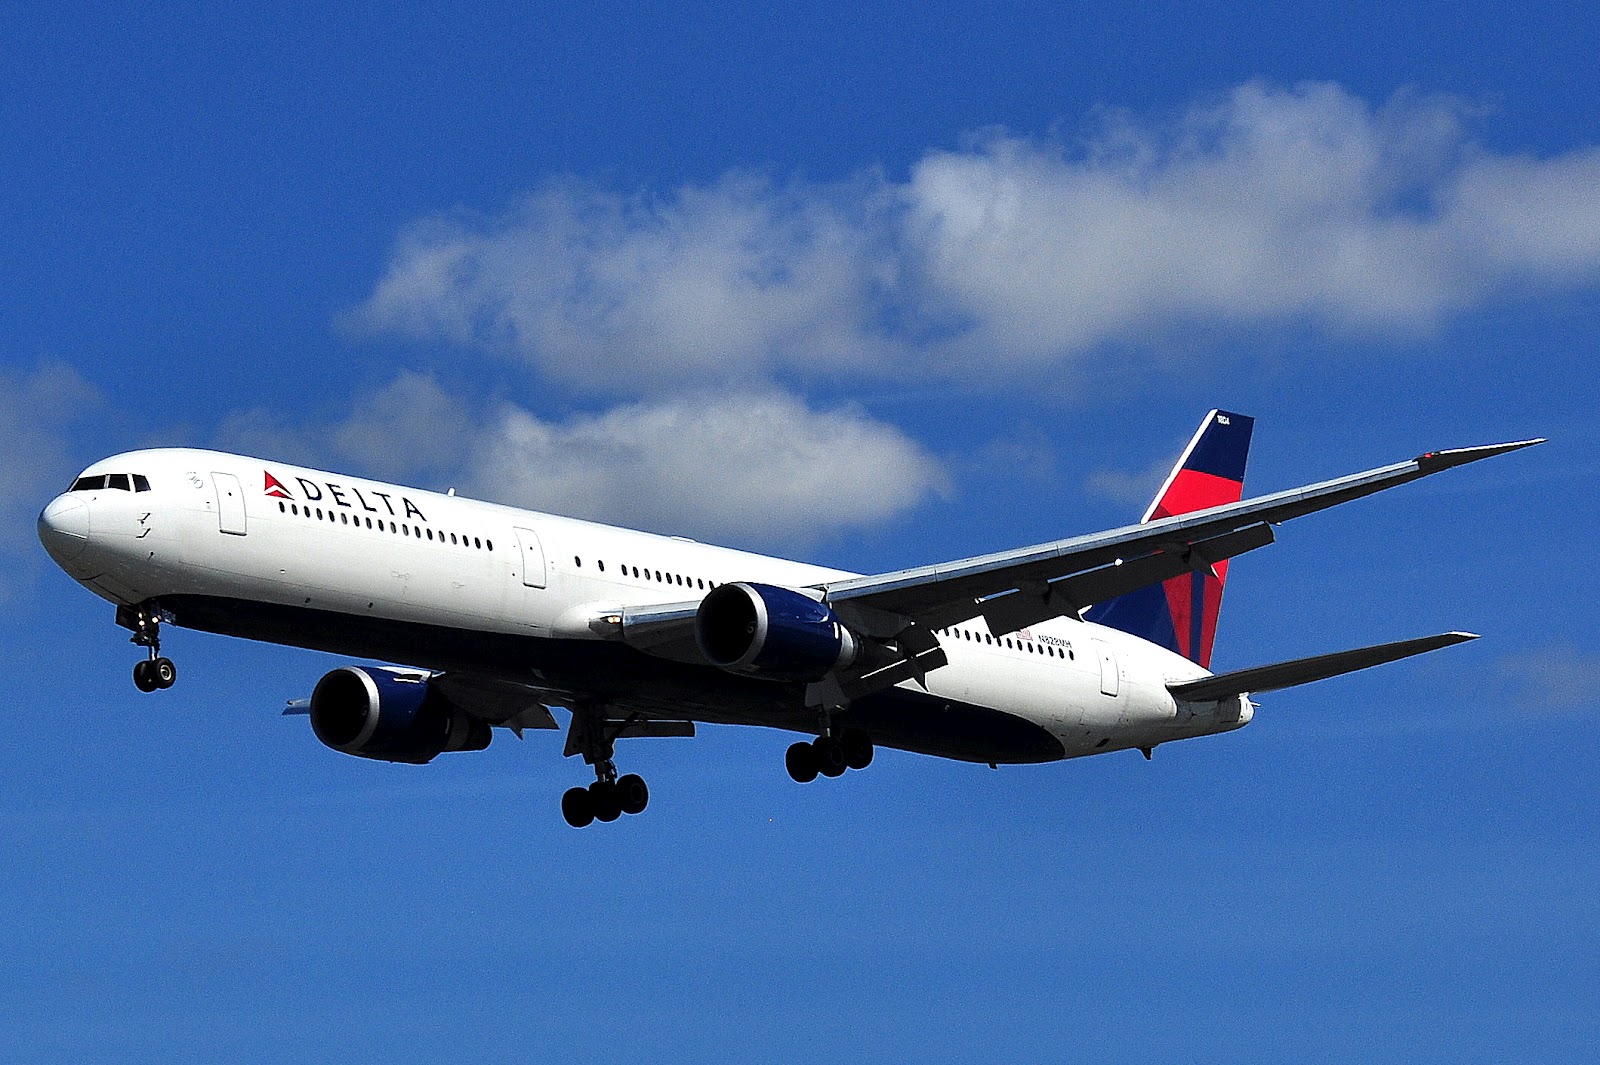 Boeing 767-400 of Delta Airlines Aircraft Wallpaper 2752